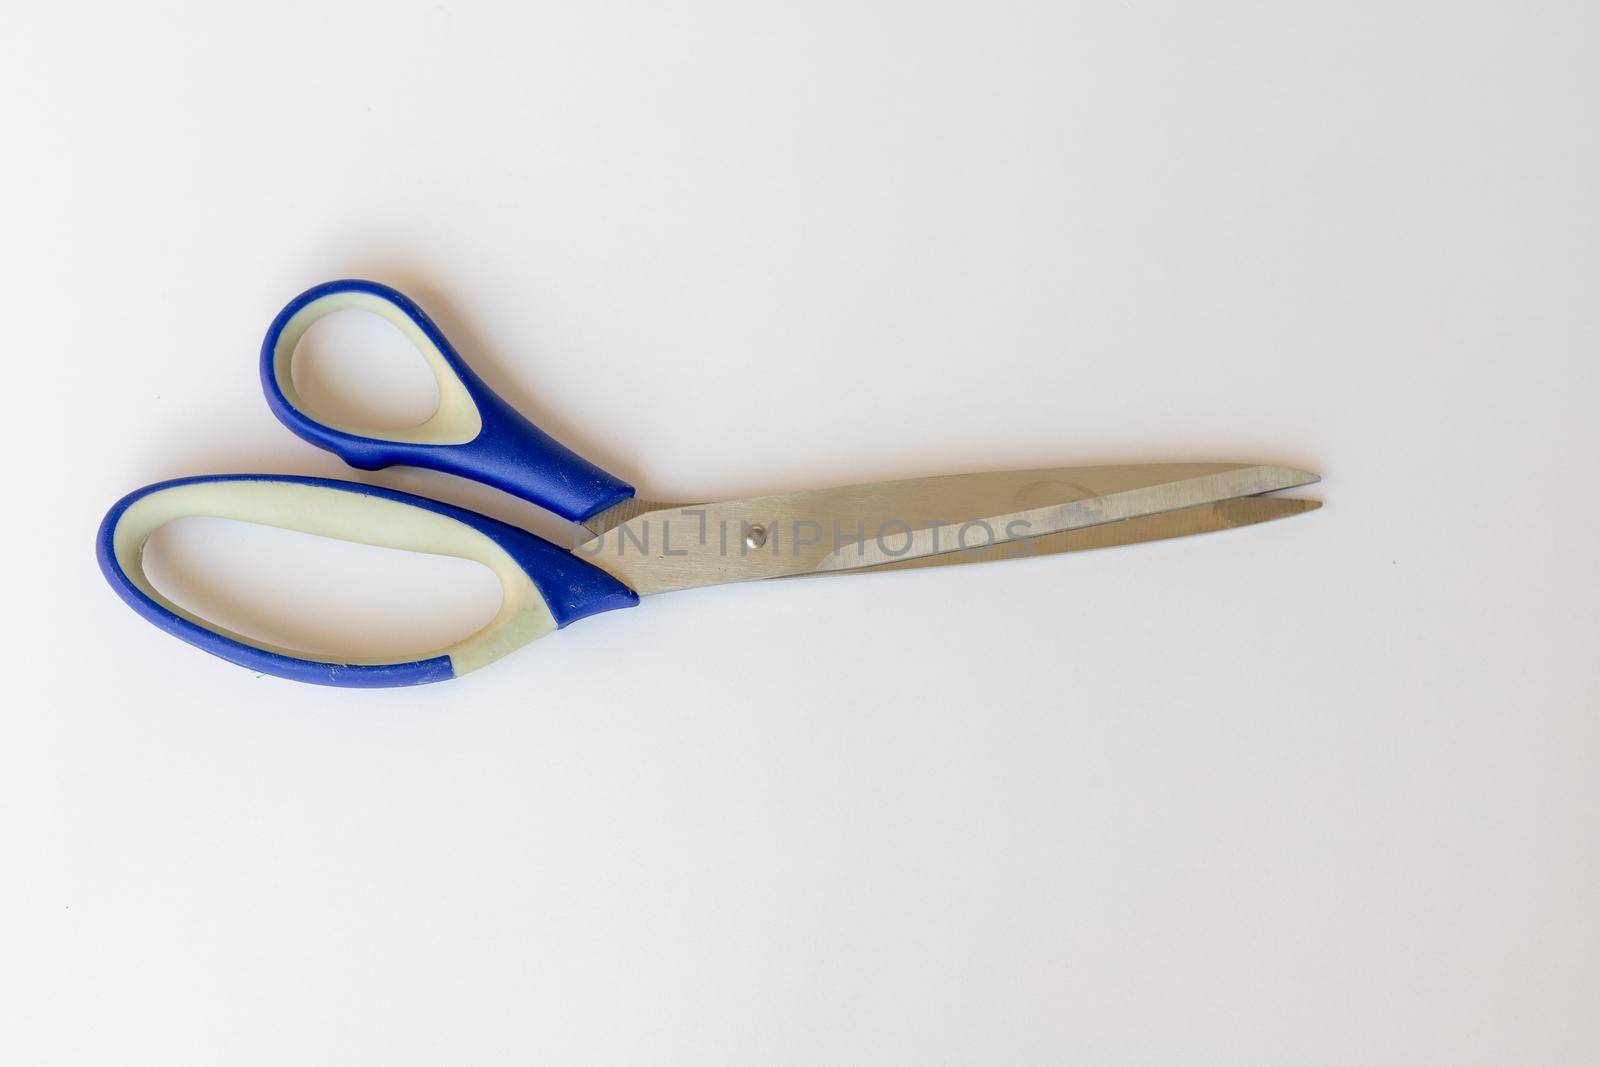 Scissors with blue handles on white isolated background by Bilalphotos